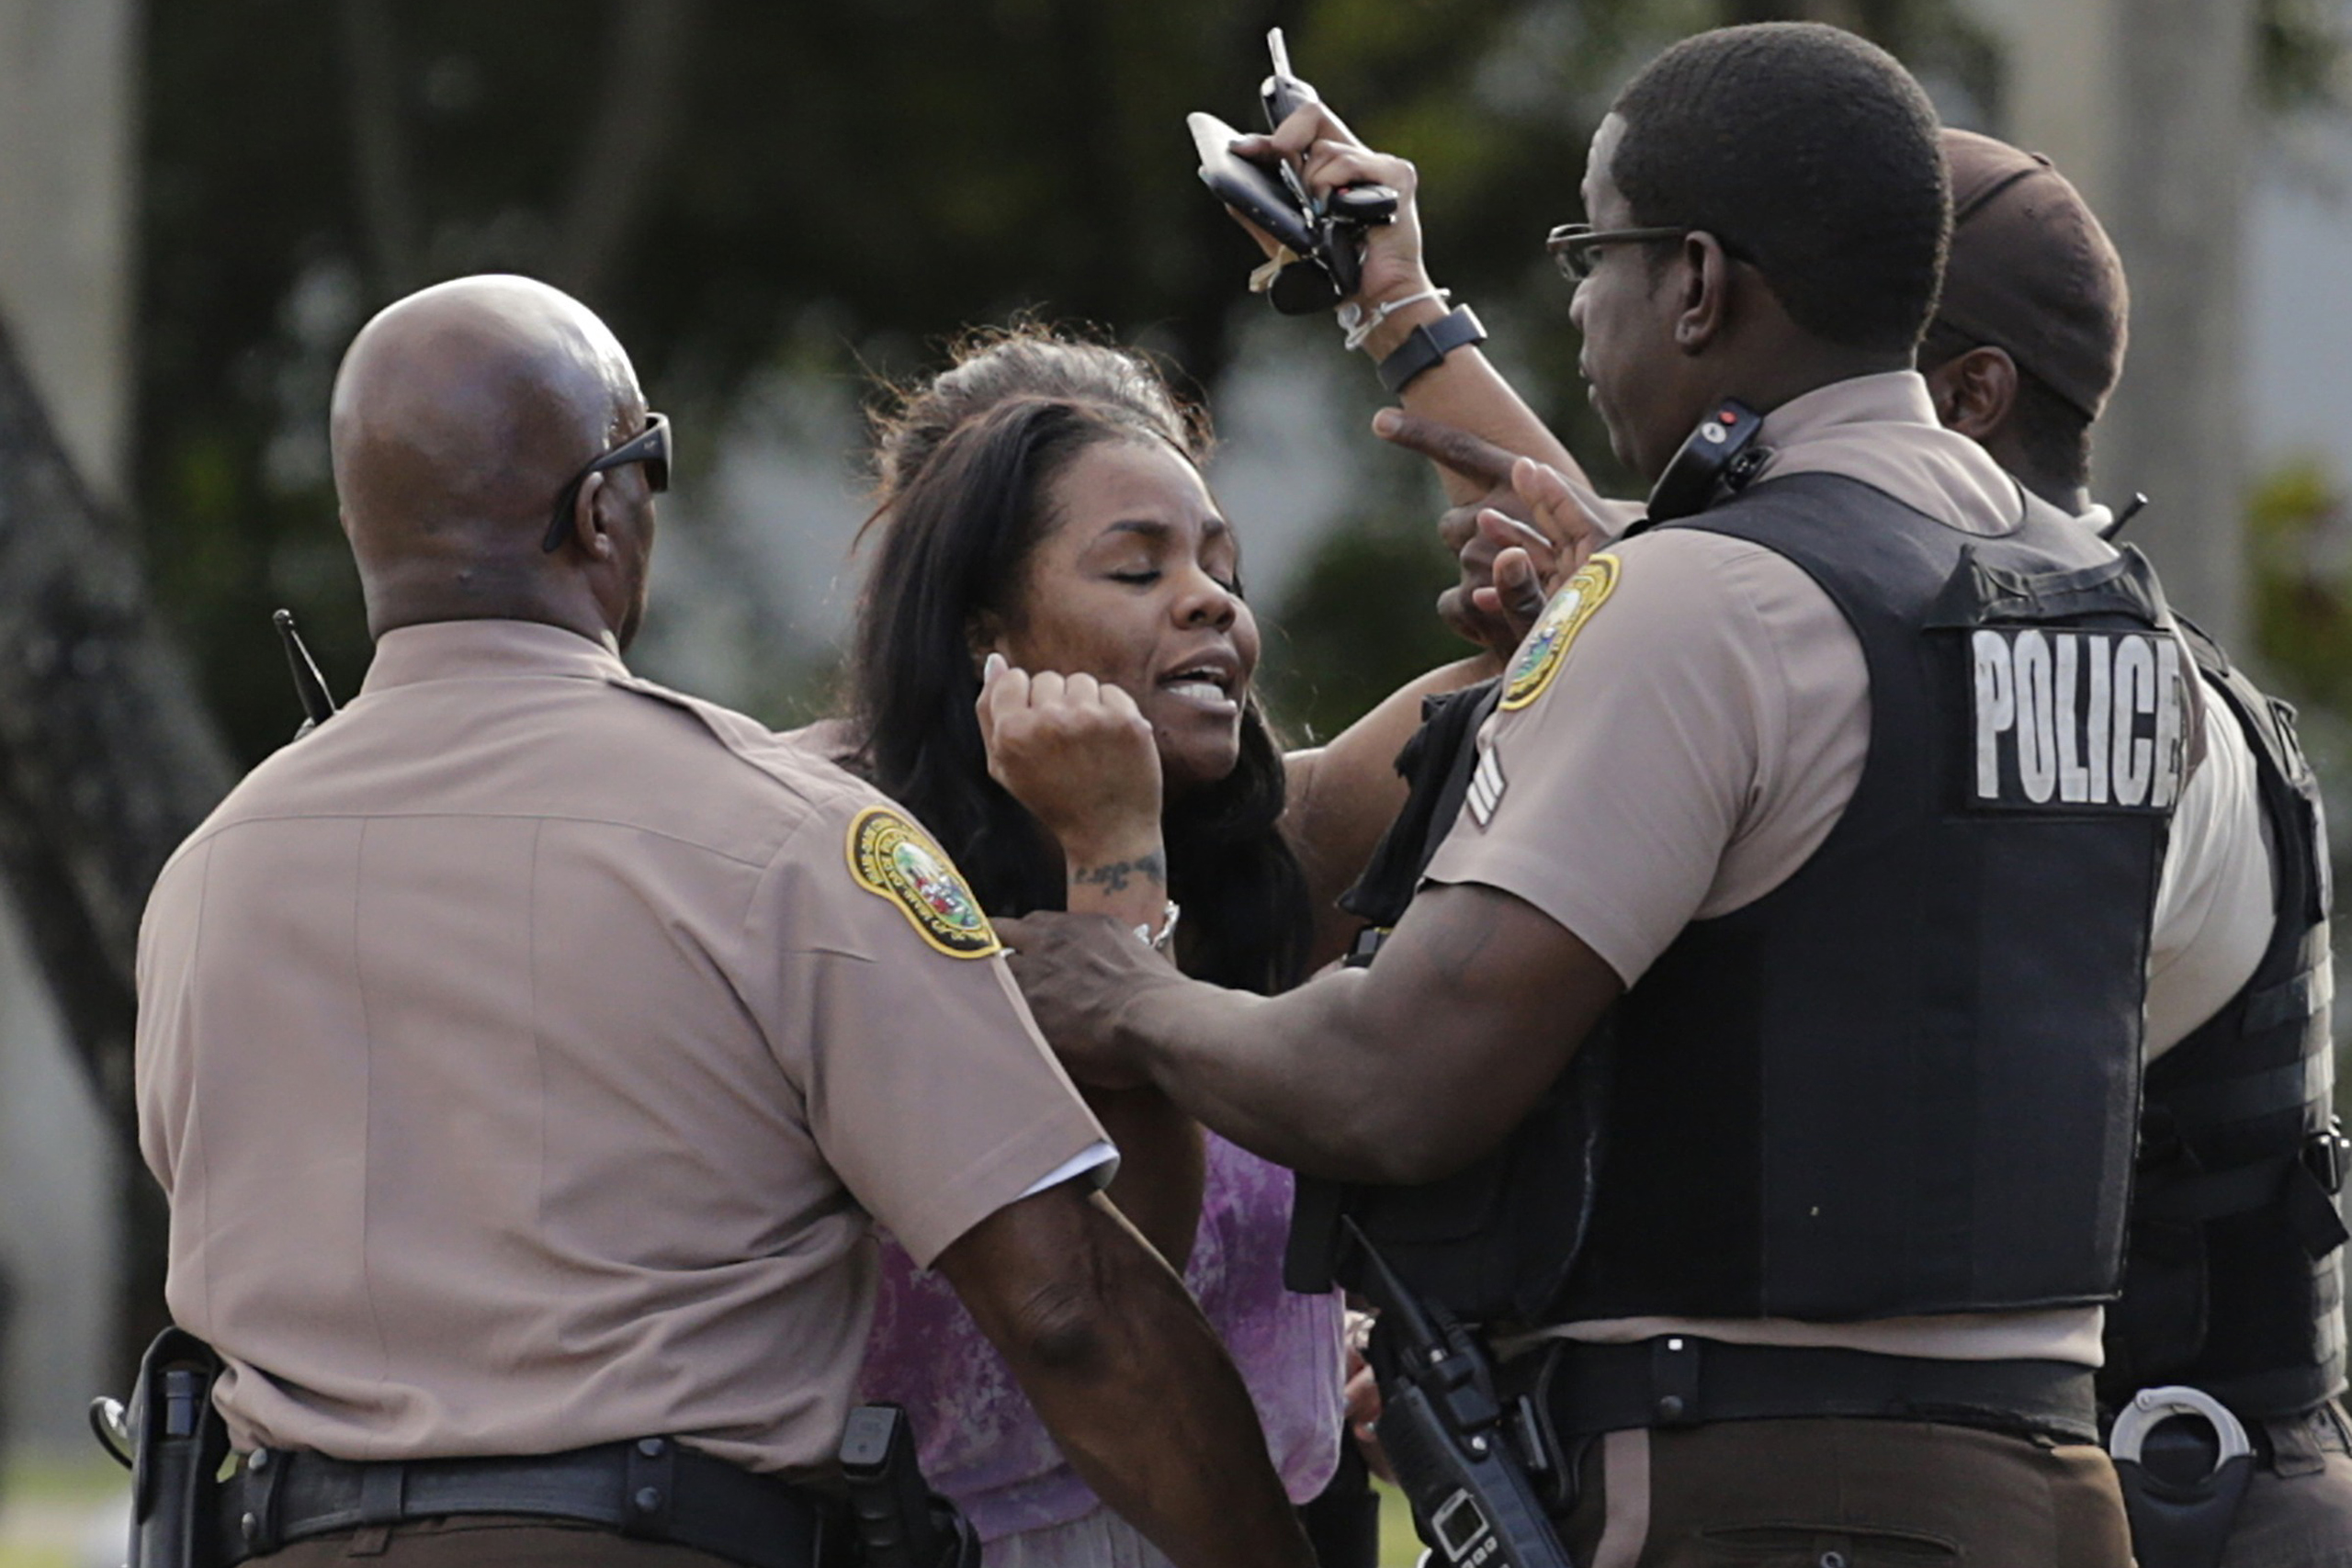 A concerned mother is met by Miami-Dade police officers as she searches for her child after several were injured in a shooting at Martin Luther King Jr. Memorial Park in Miami-Dade, Fla., on, Jan. 16, 2017. (Carl Juste—Miami Herald/AP)